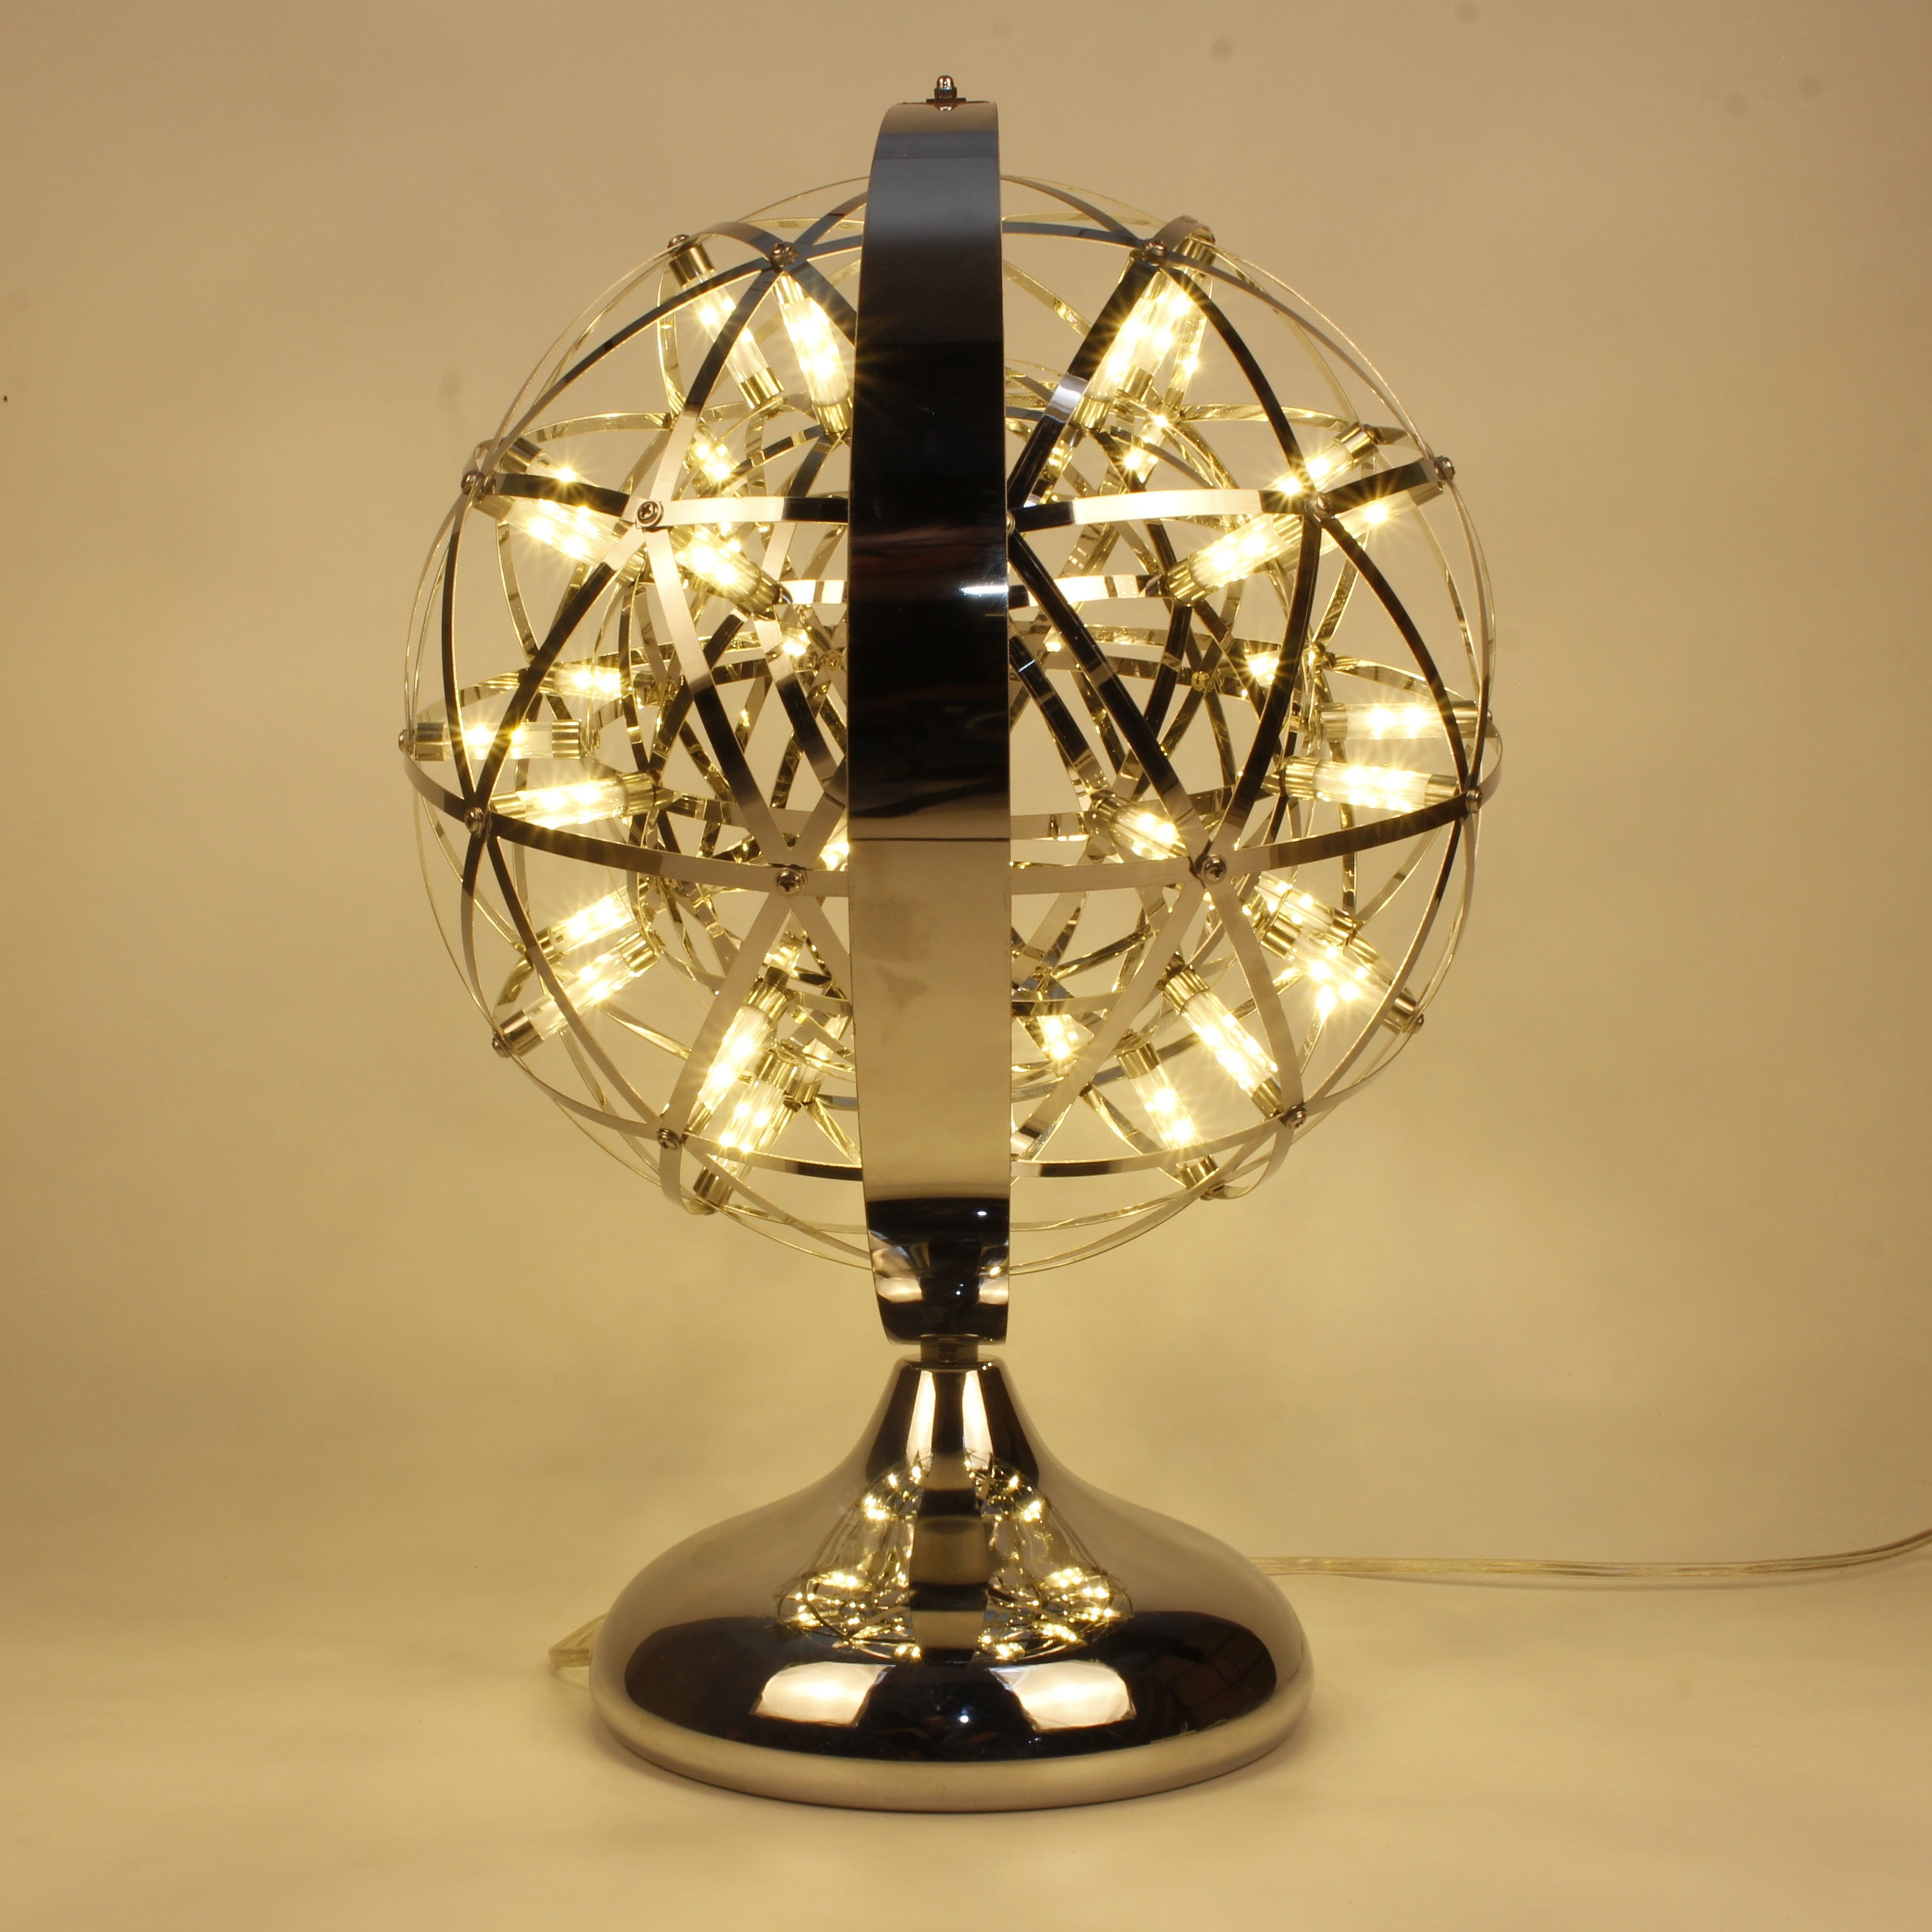 Stainless Steel Ambience Decorative Table Lamp